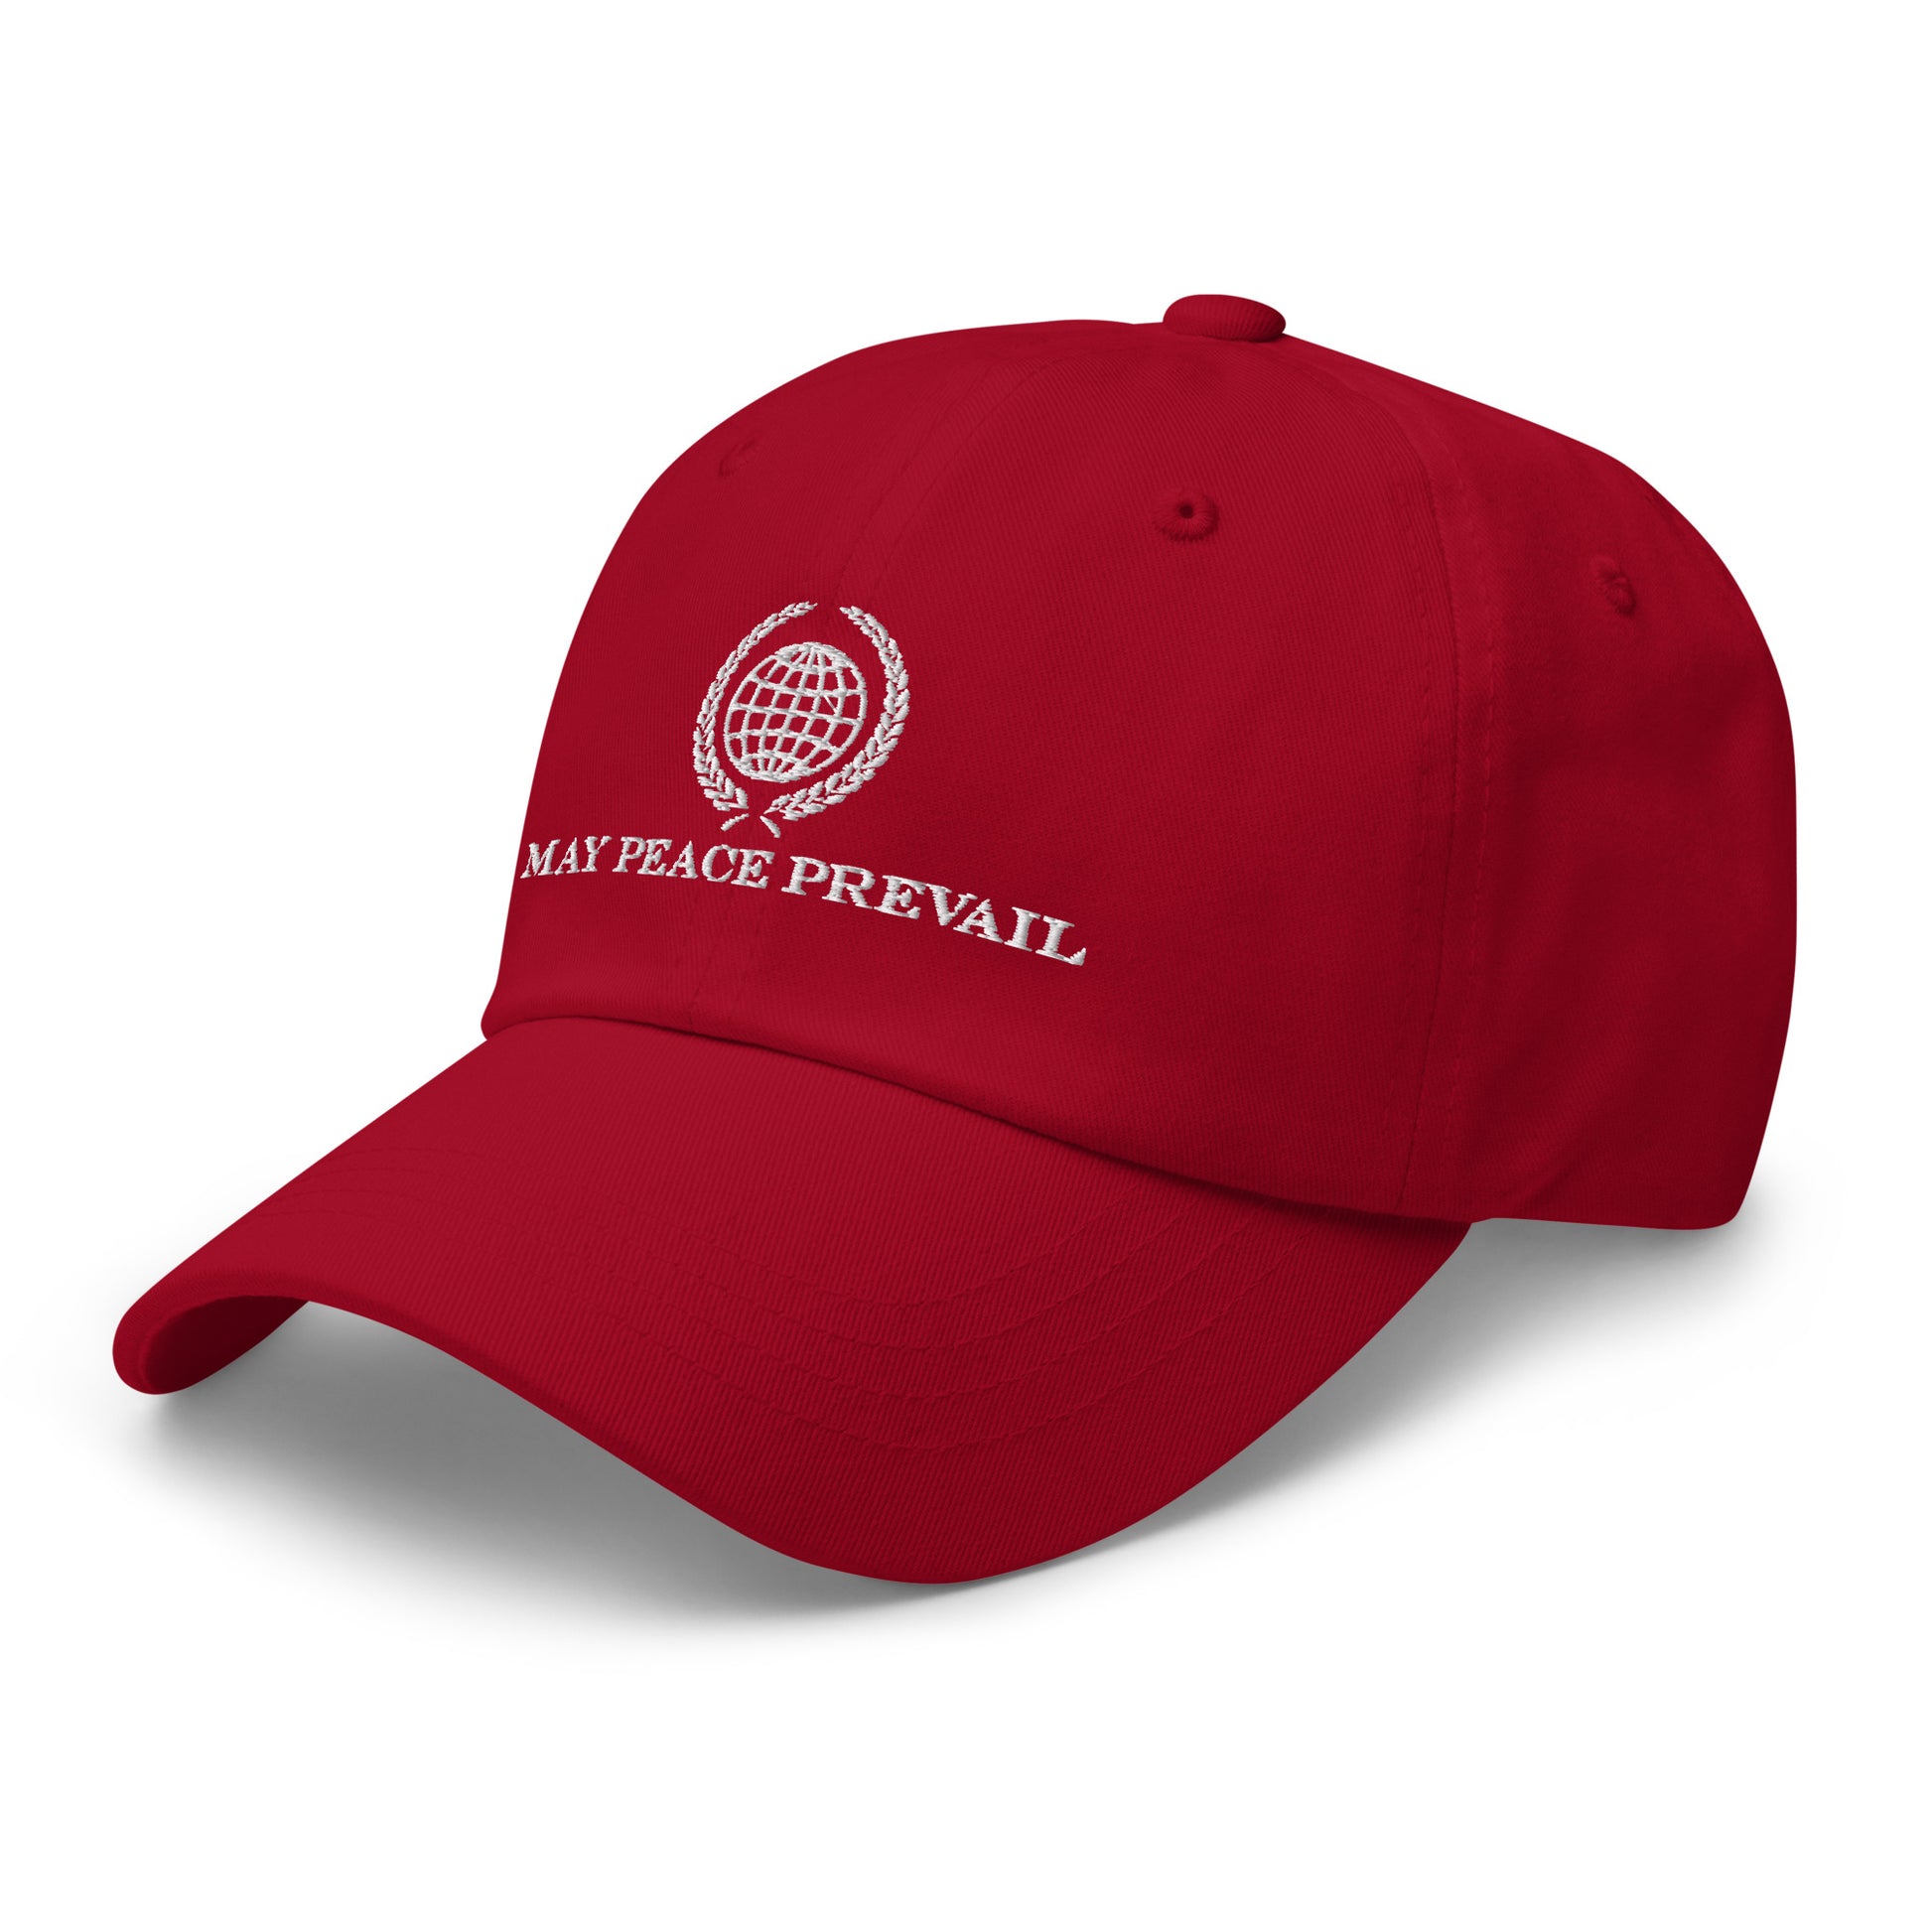 MAY PEACE PREVAIL HATS are curated and designed under Dzimig Studios' Peace Campaign Project. The hats come in various colors to match your style and sits on your head just like a crown.